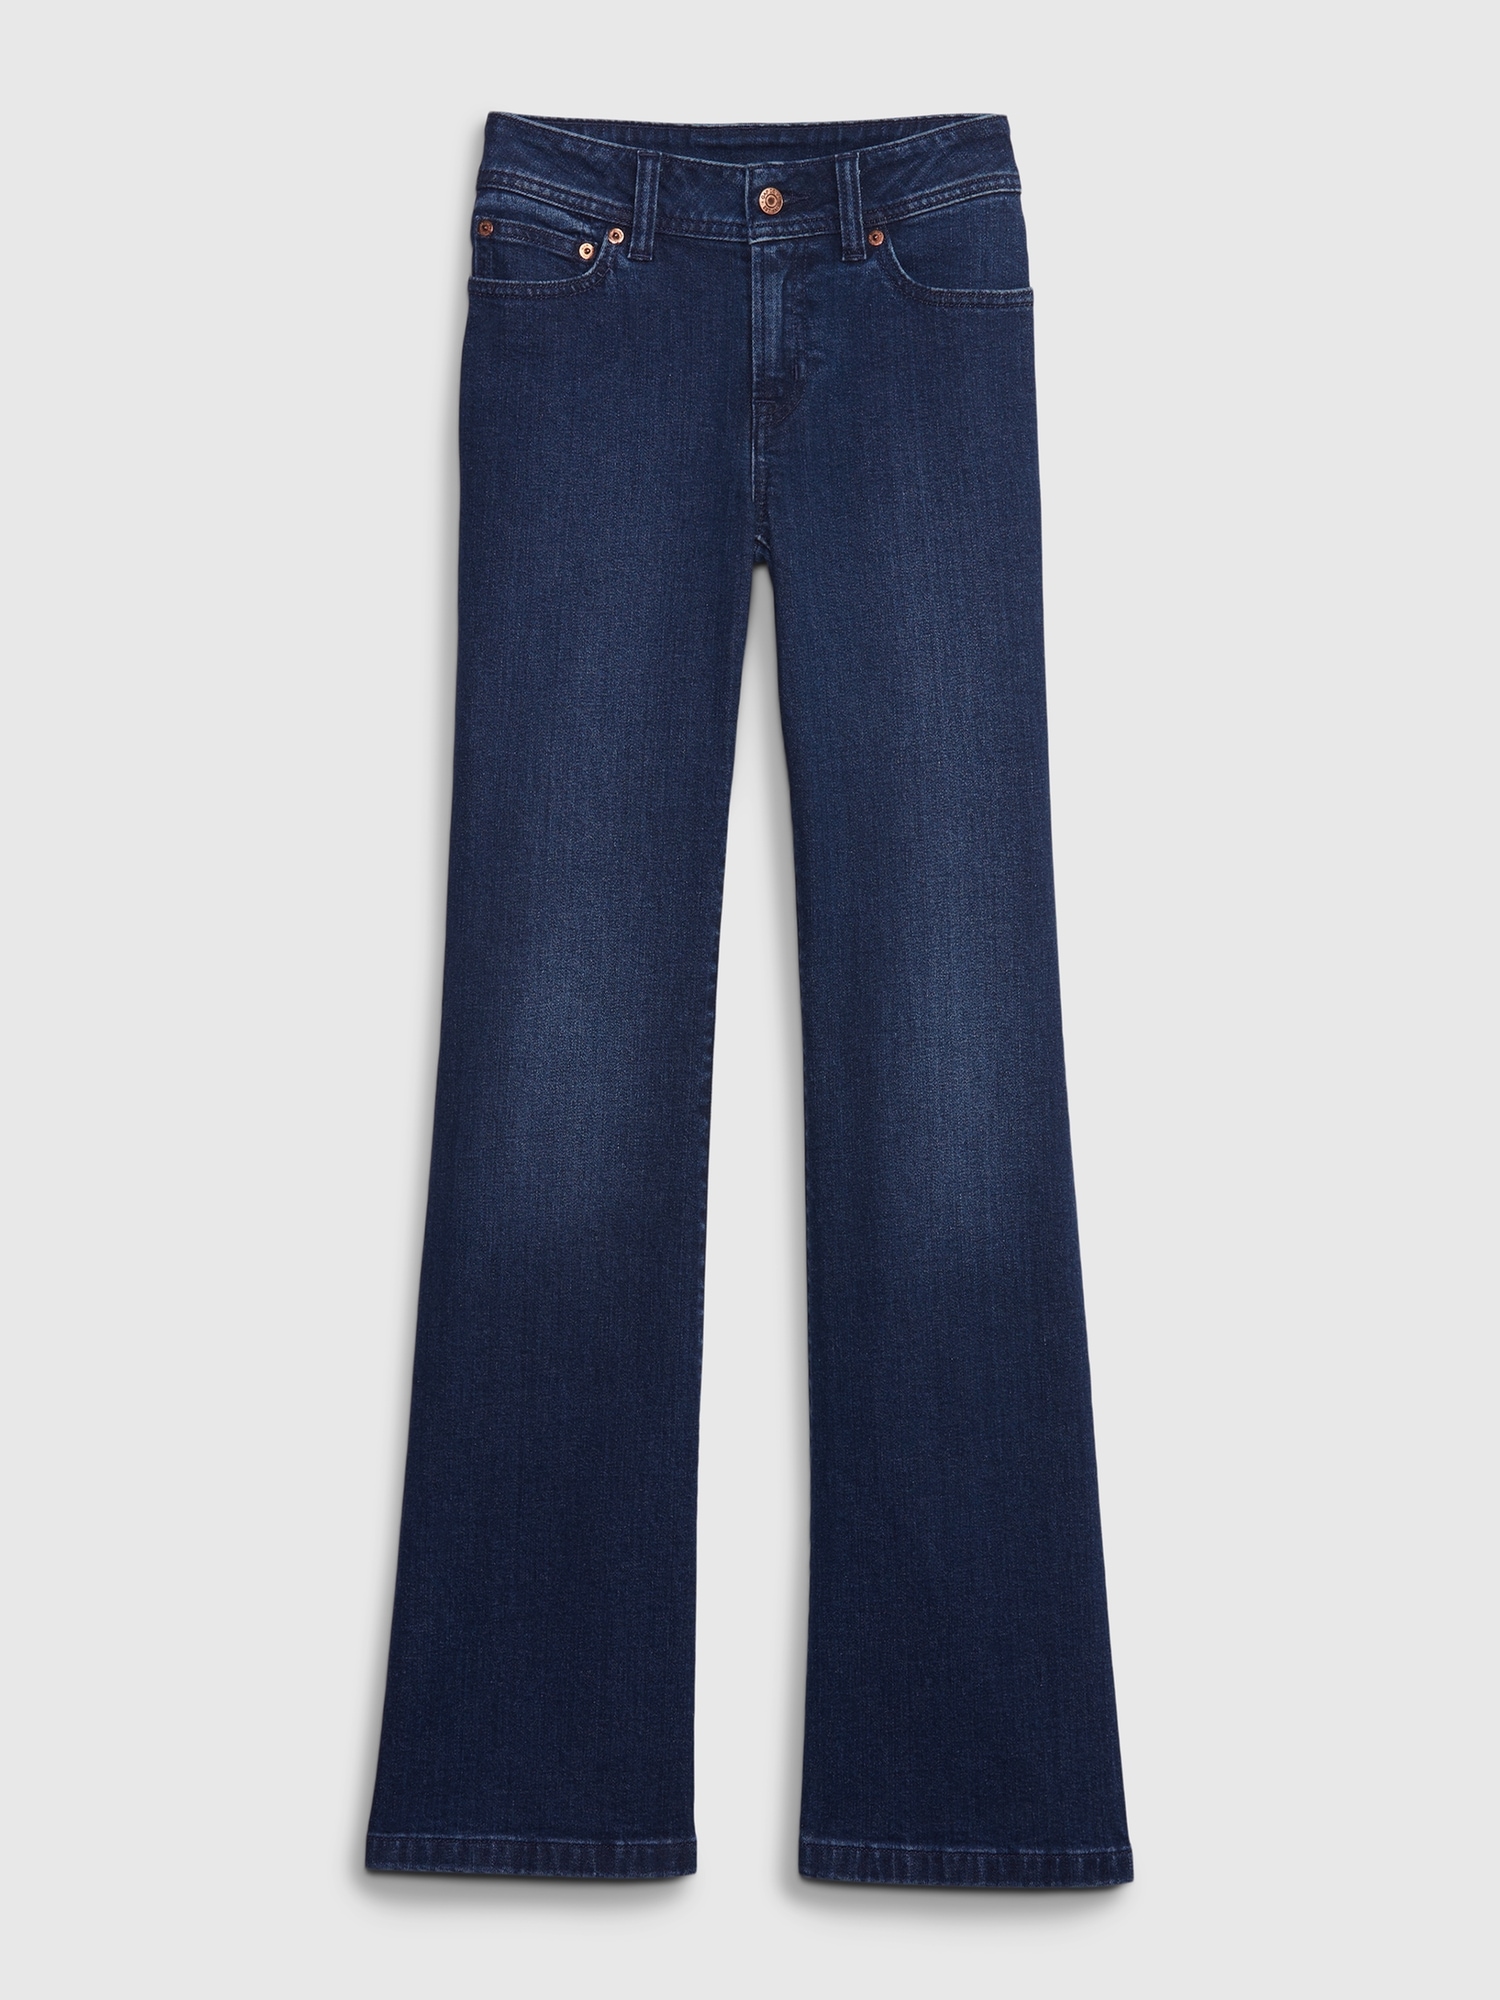 Low Rise '70s Flare Jeans | Gap